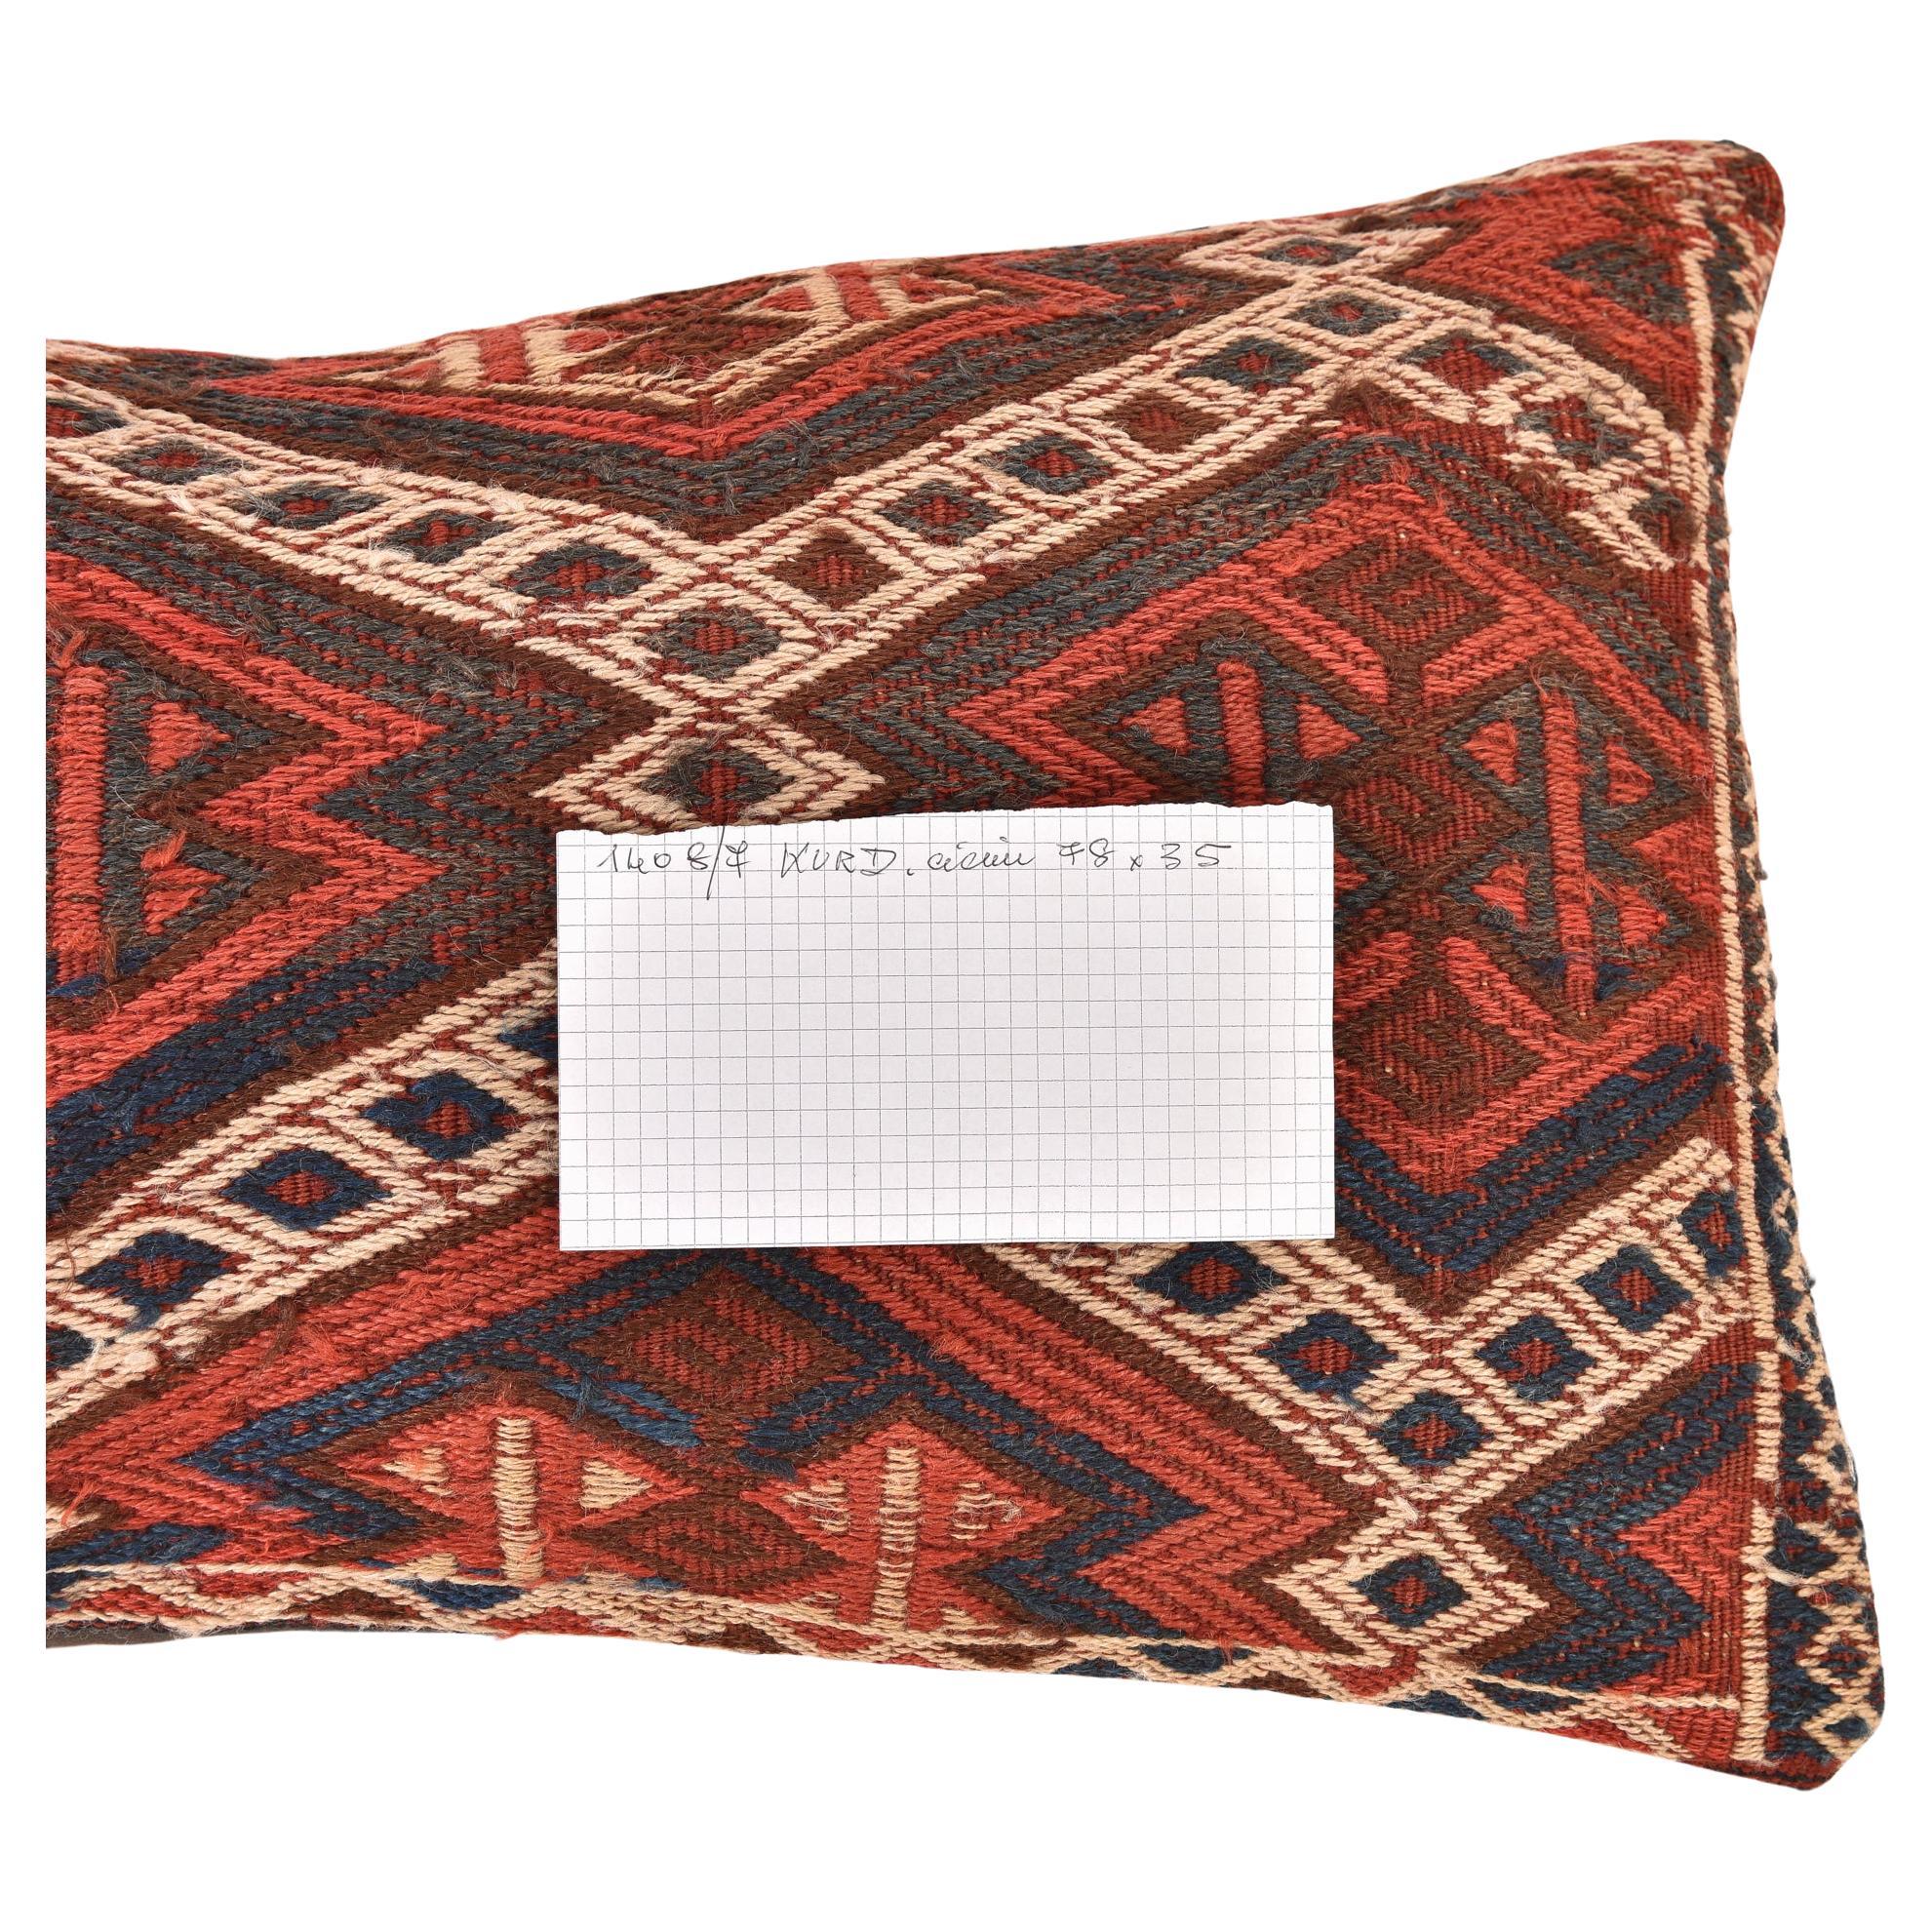 nr. 1408/7 - Long nomadic artifact, cushion sewn, all woven and embroidered by hand.  Comfortable and beautiful.